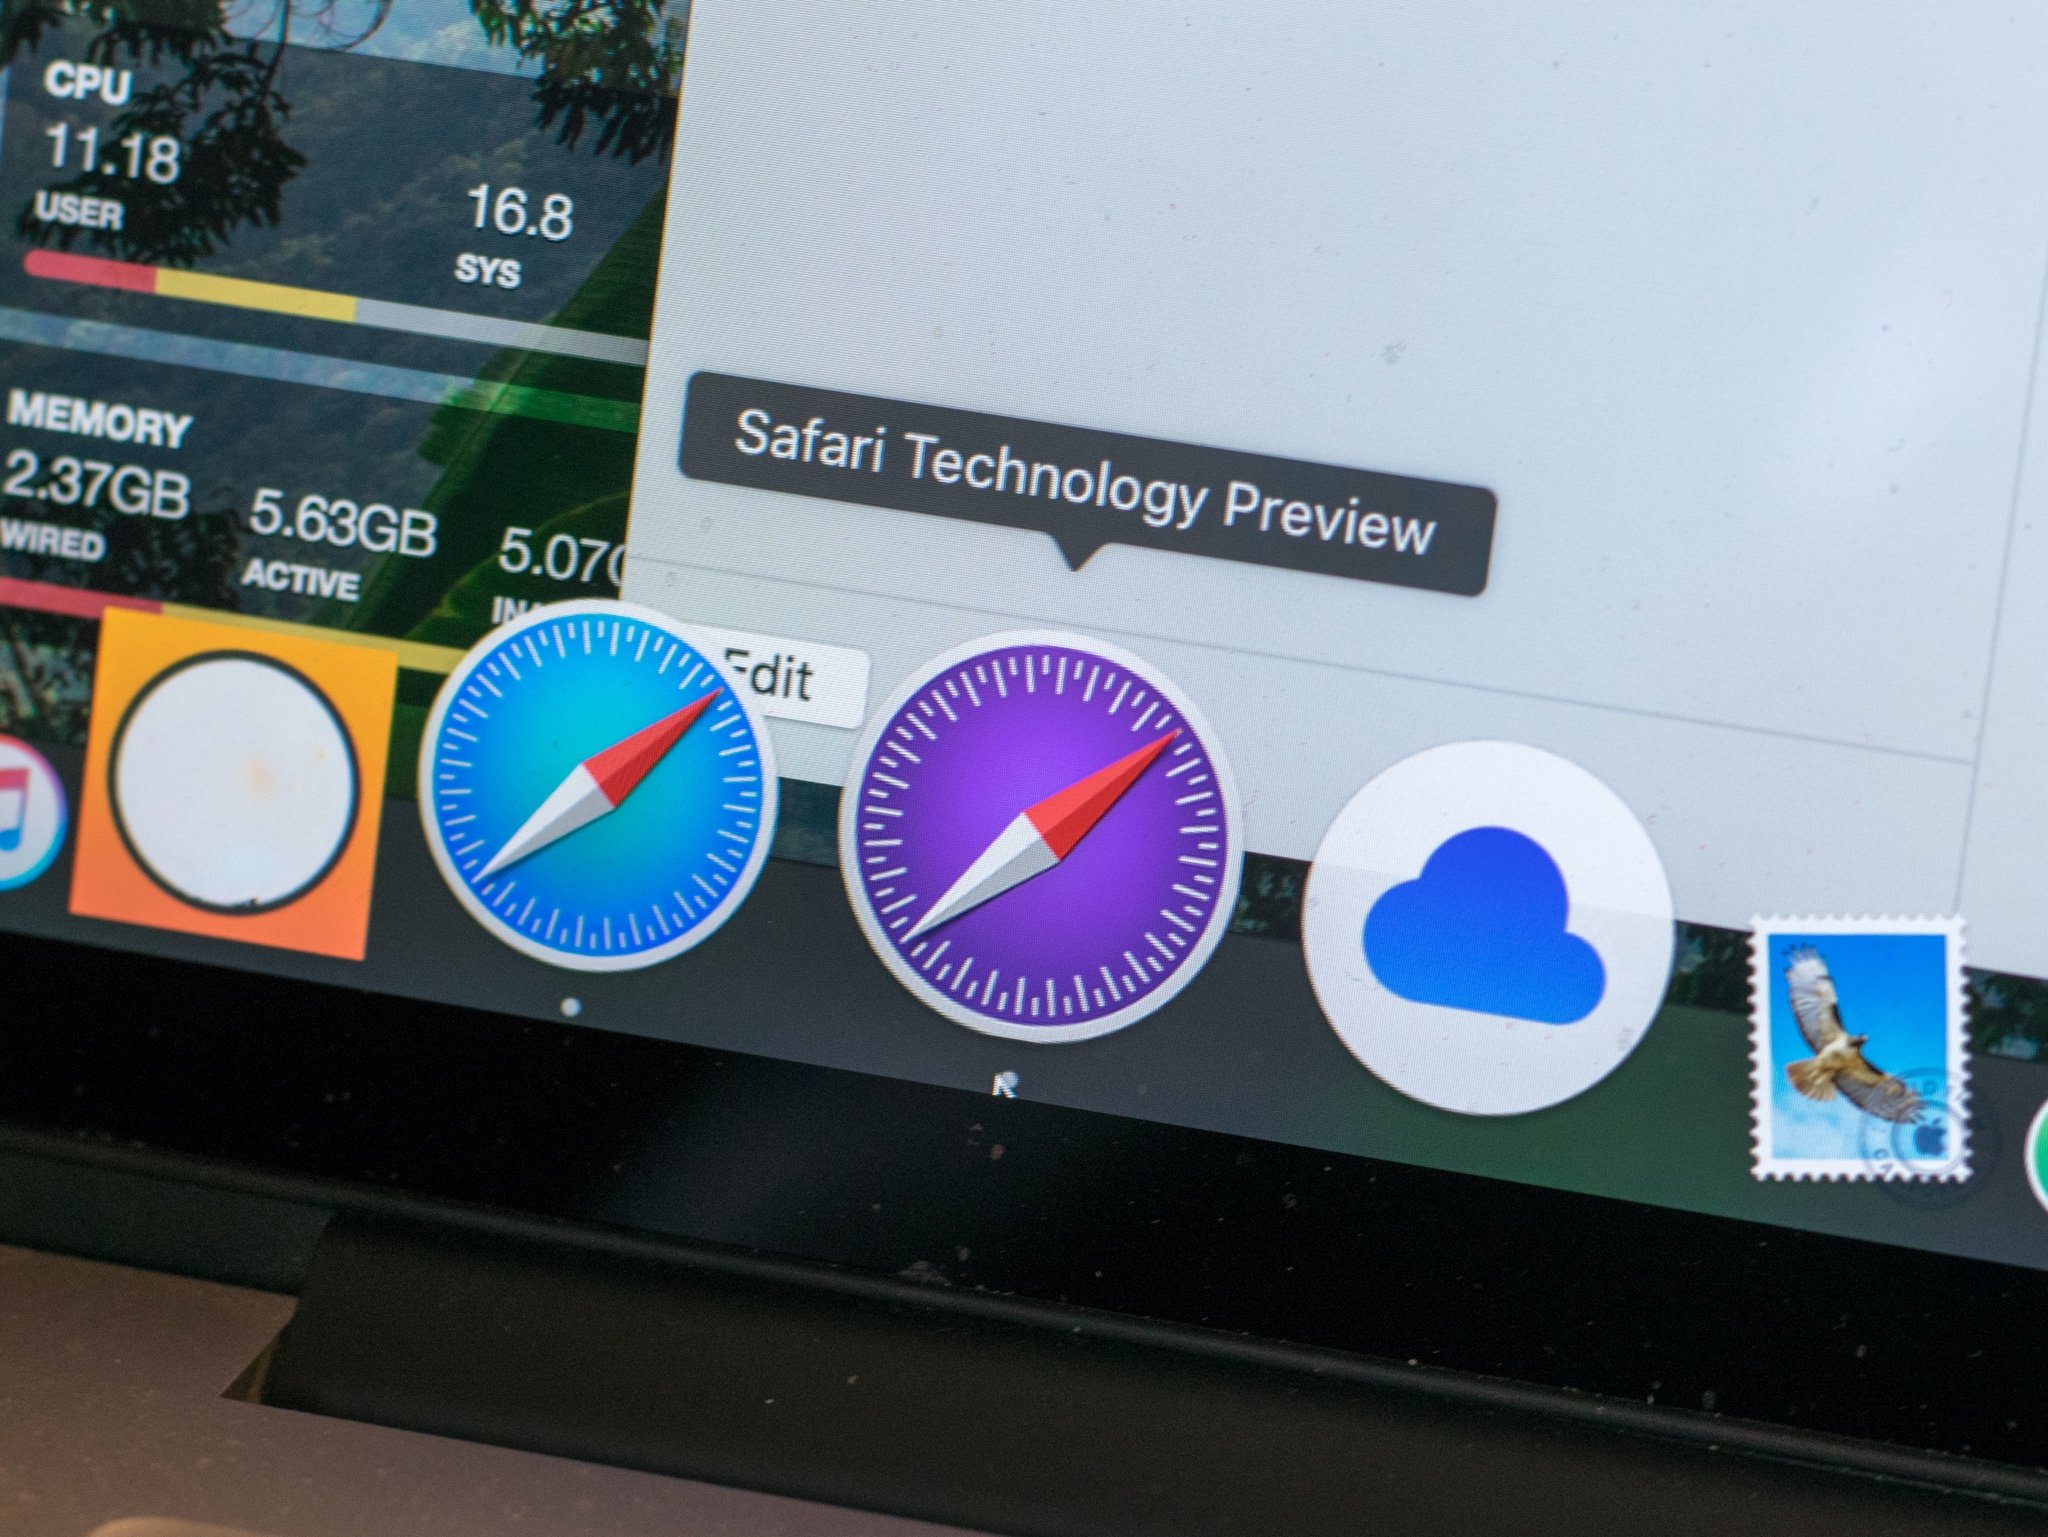 Safari Technology Preview release 5 now available to download